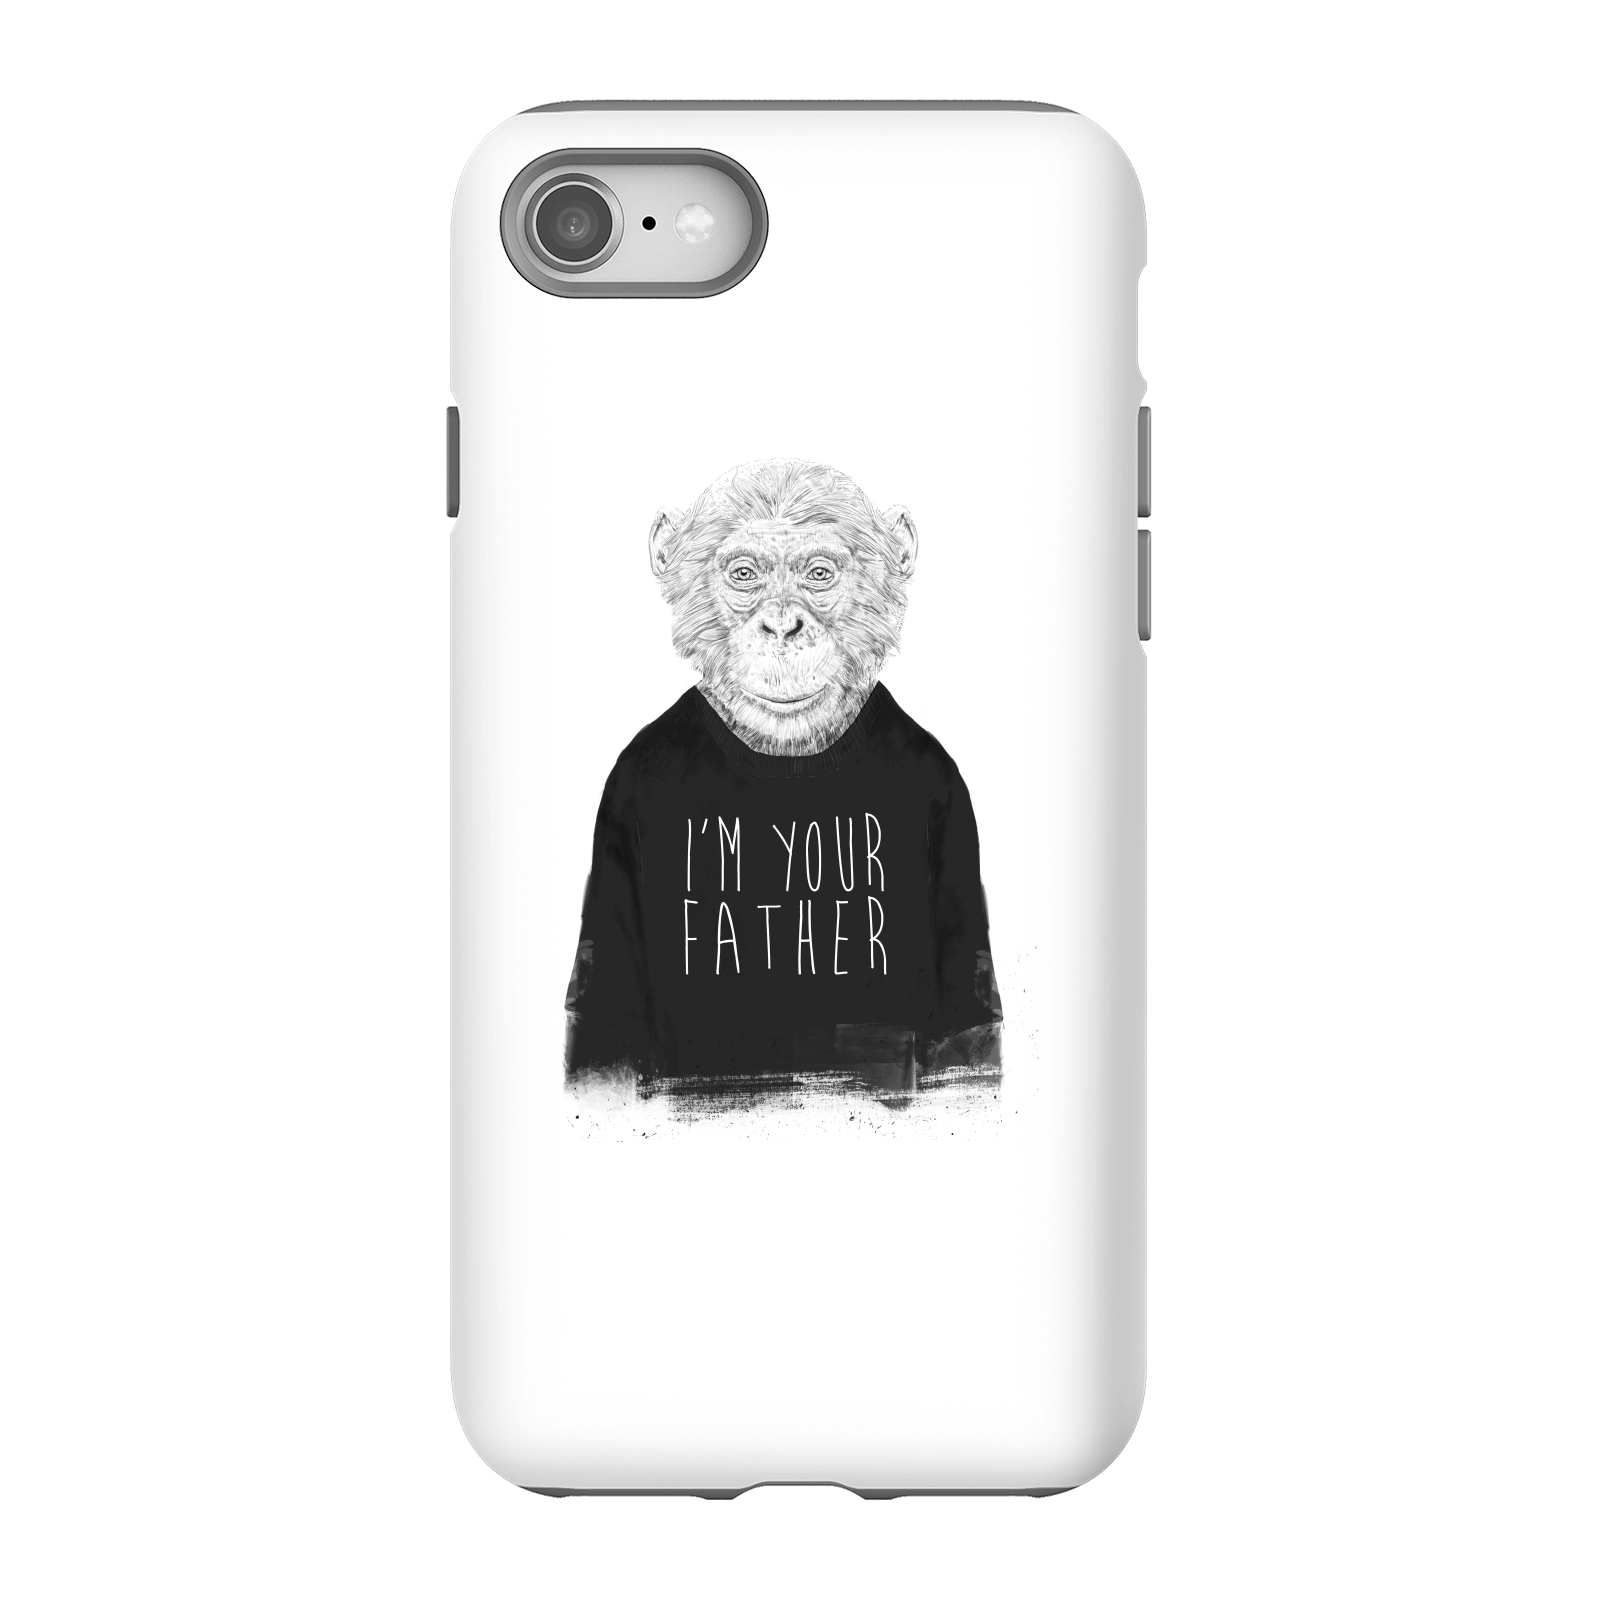 Balazs Solti I'm Your Father Phone Case for iPhone and Android - iPhone 8 - Tough Case - Gloss